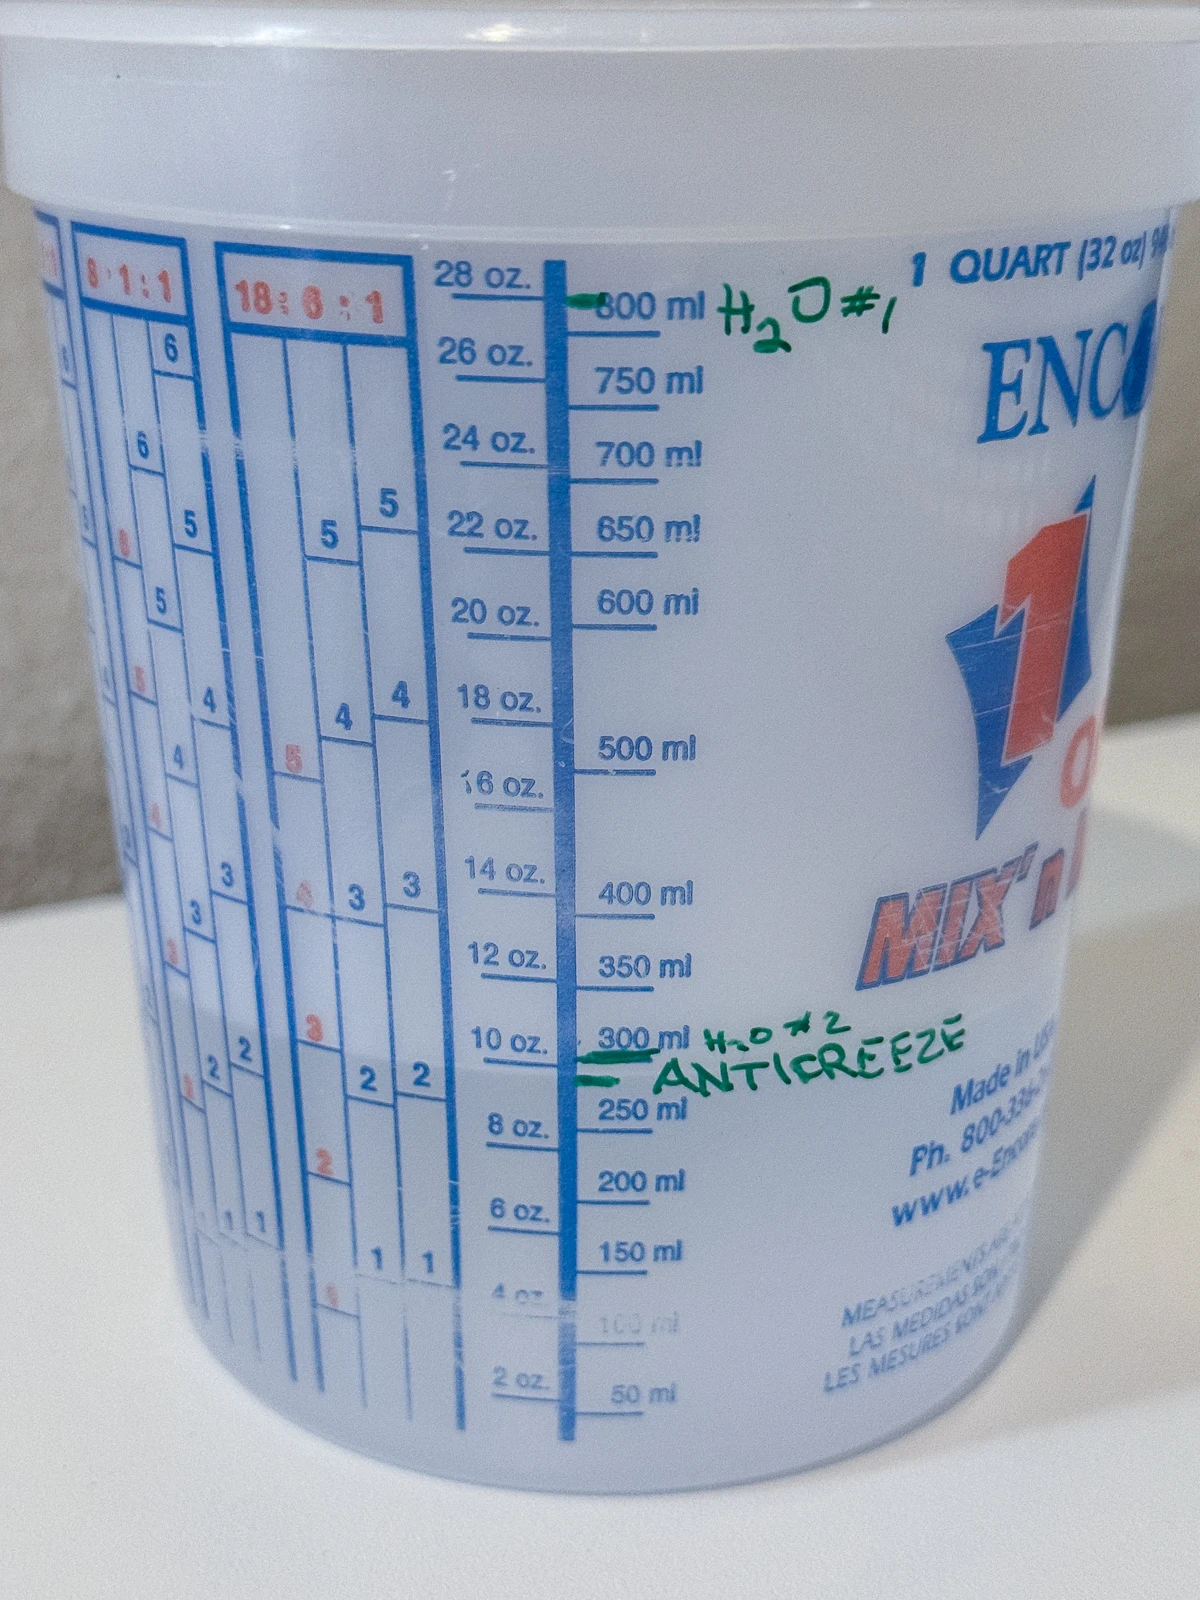 antifreeze and water levels required for a CO2 laser marked on the side of a measuring cup